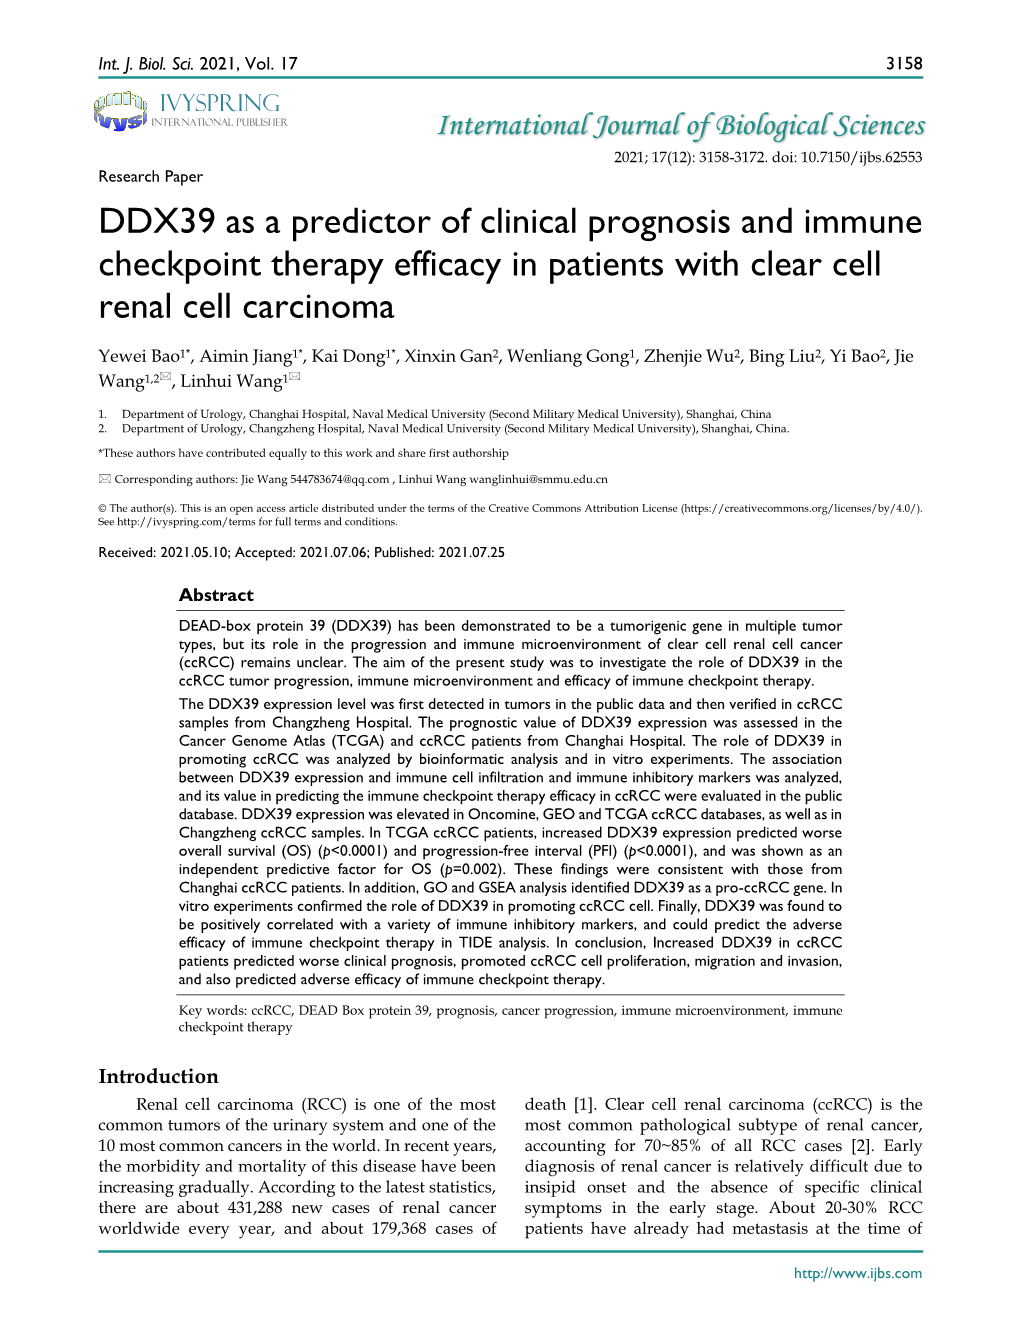 DDX39 As a Predictor of Clinical Prognosis and Immune Checkpoint Therapy Efficacy in Patients with Clear Cell Renal Cell Carcinoma